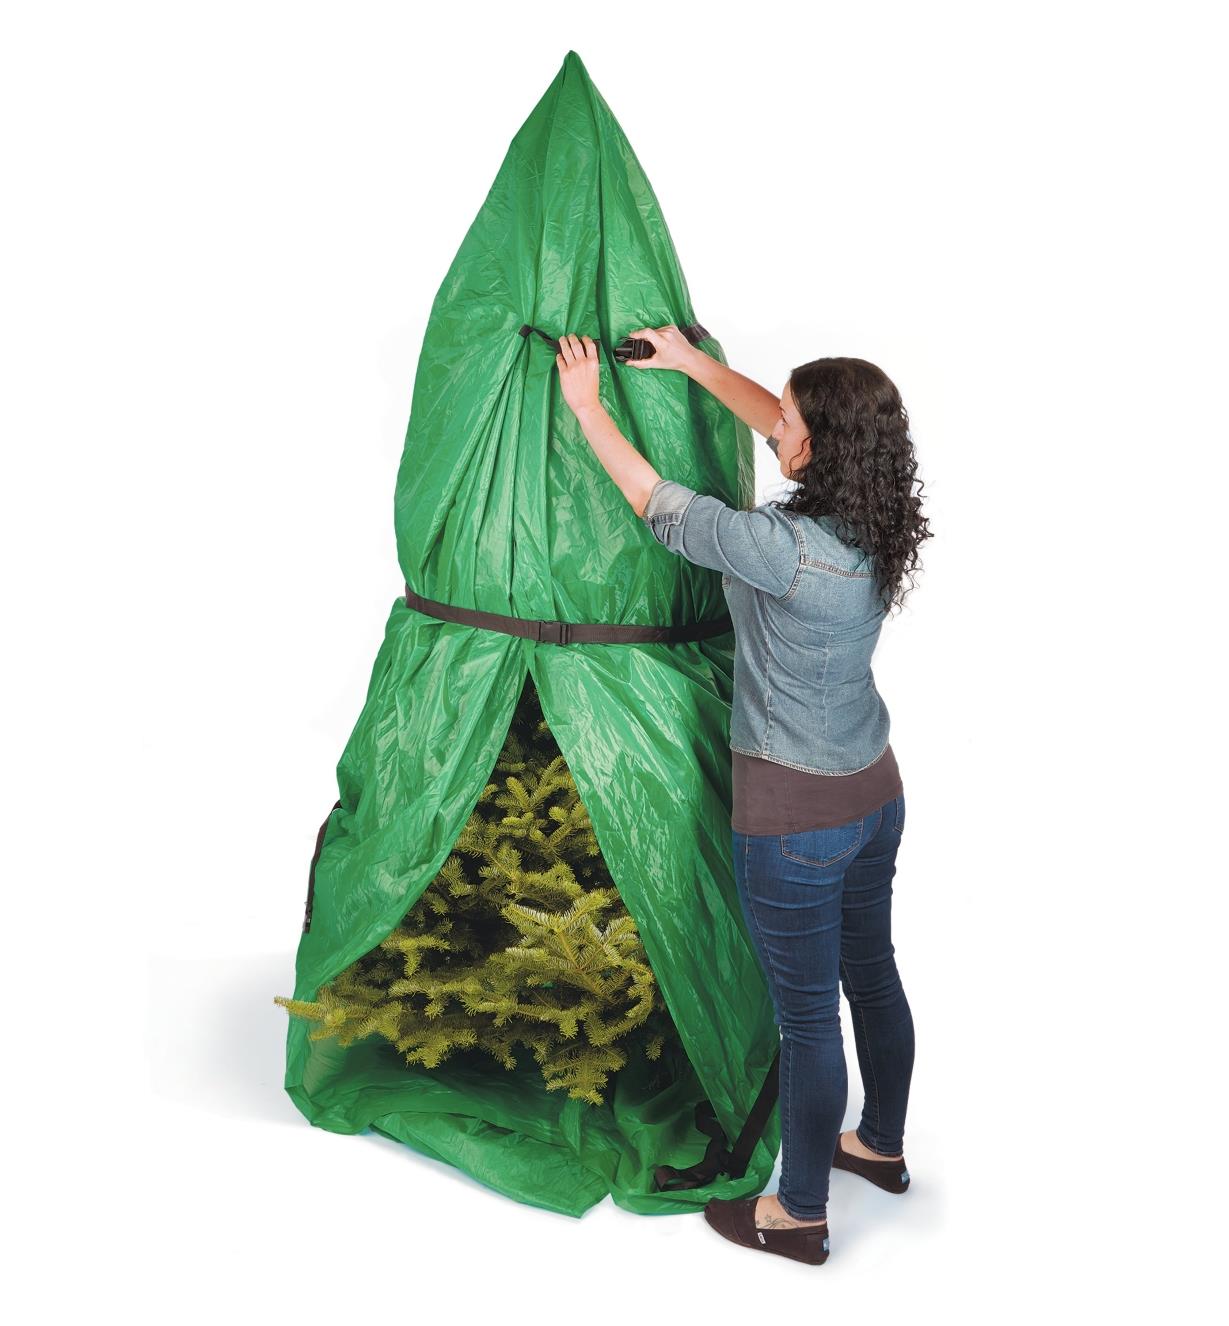 A woman cinches the straps on a Christmas tree transfer bag wrapped around a tree that is standing up